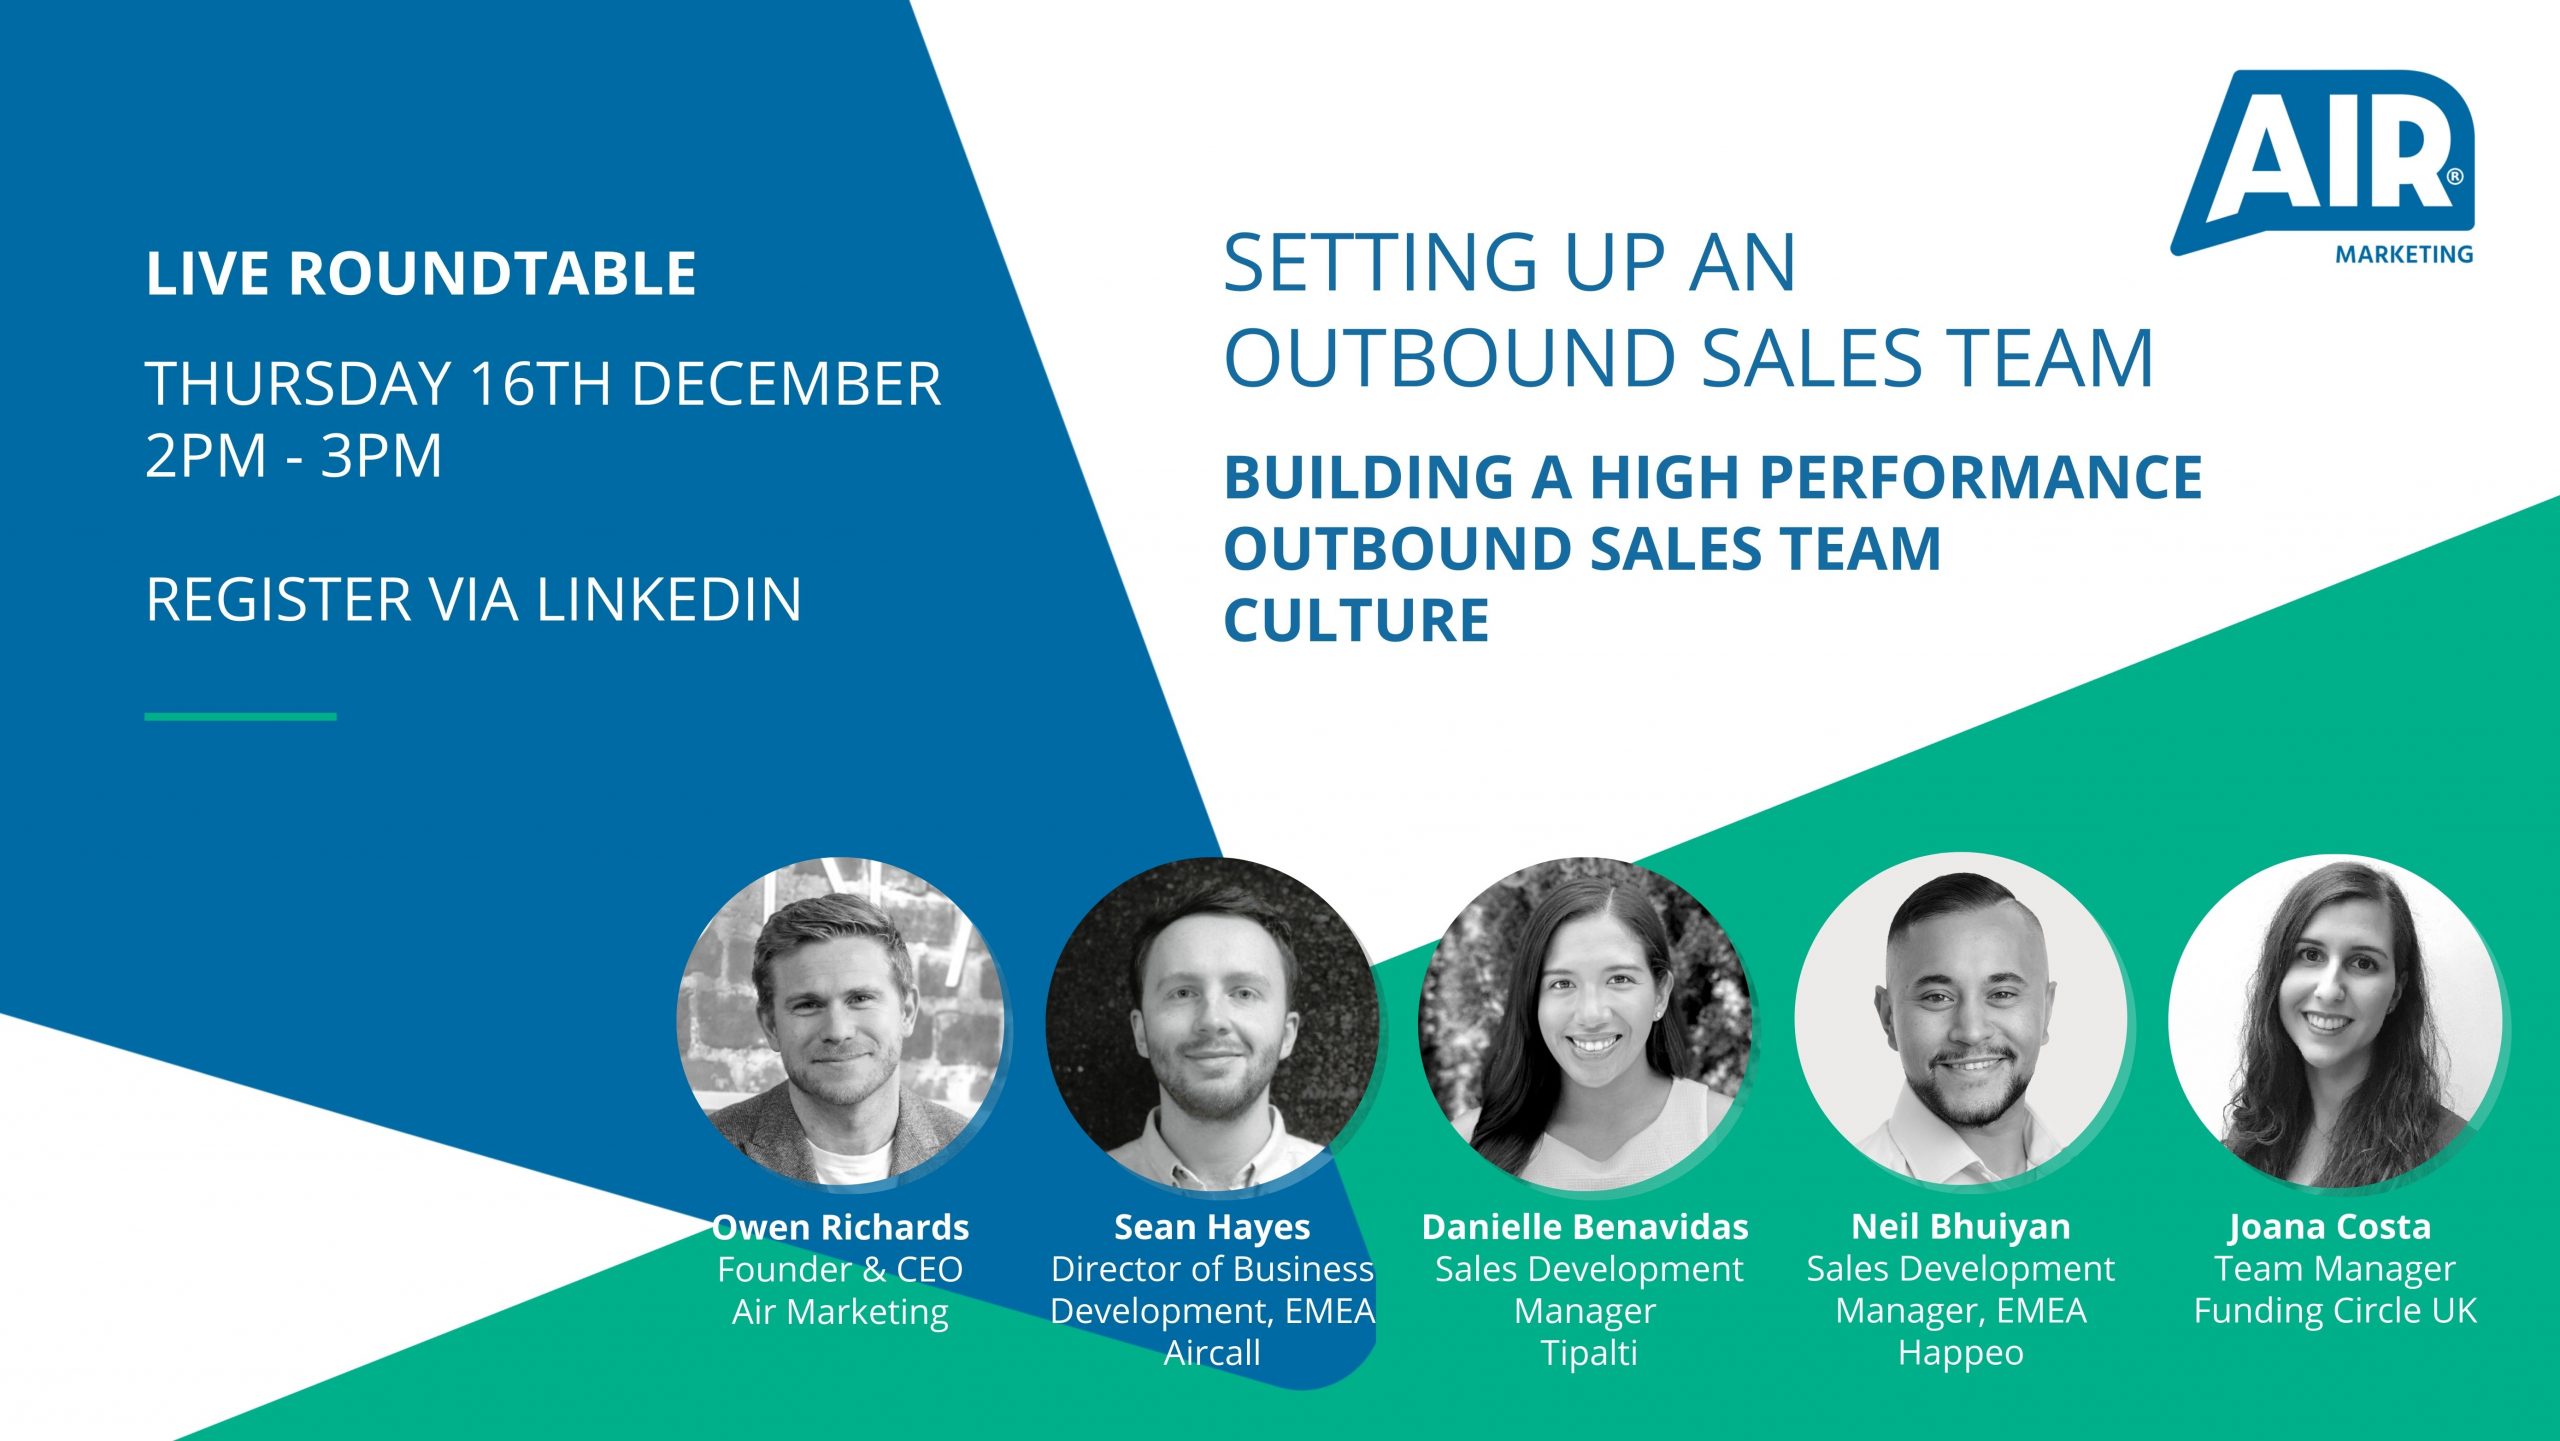 LIVE Roundtable: Building A High Performance Outbound Sales Team Culture